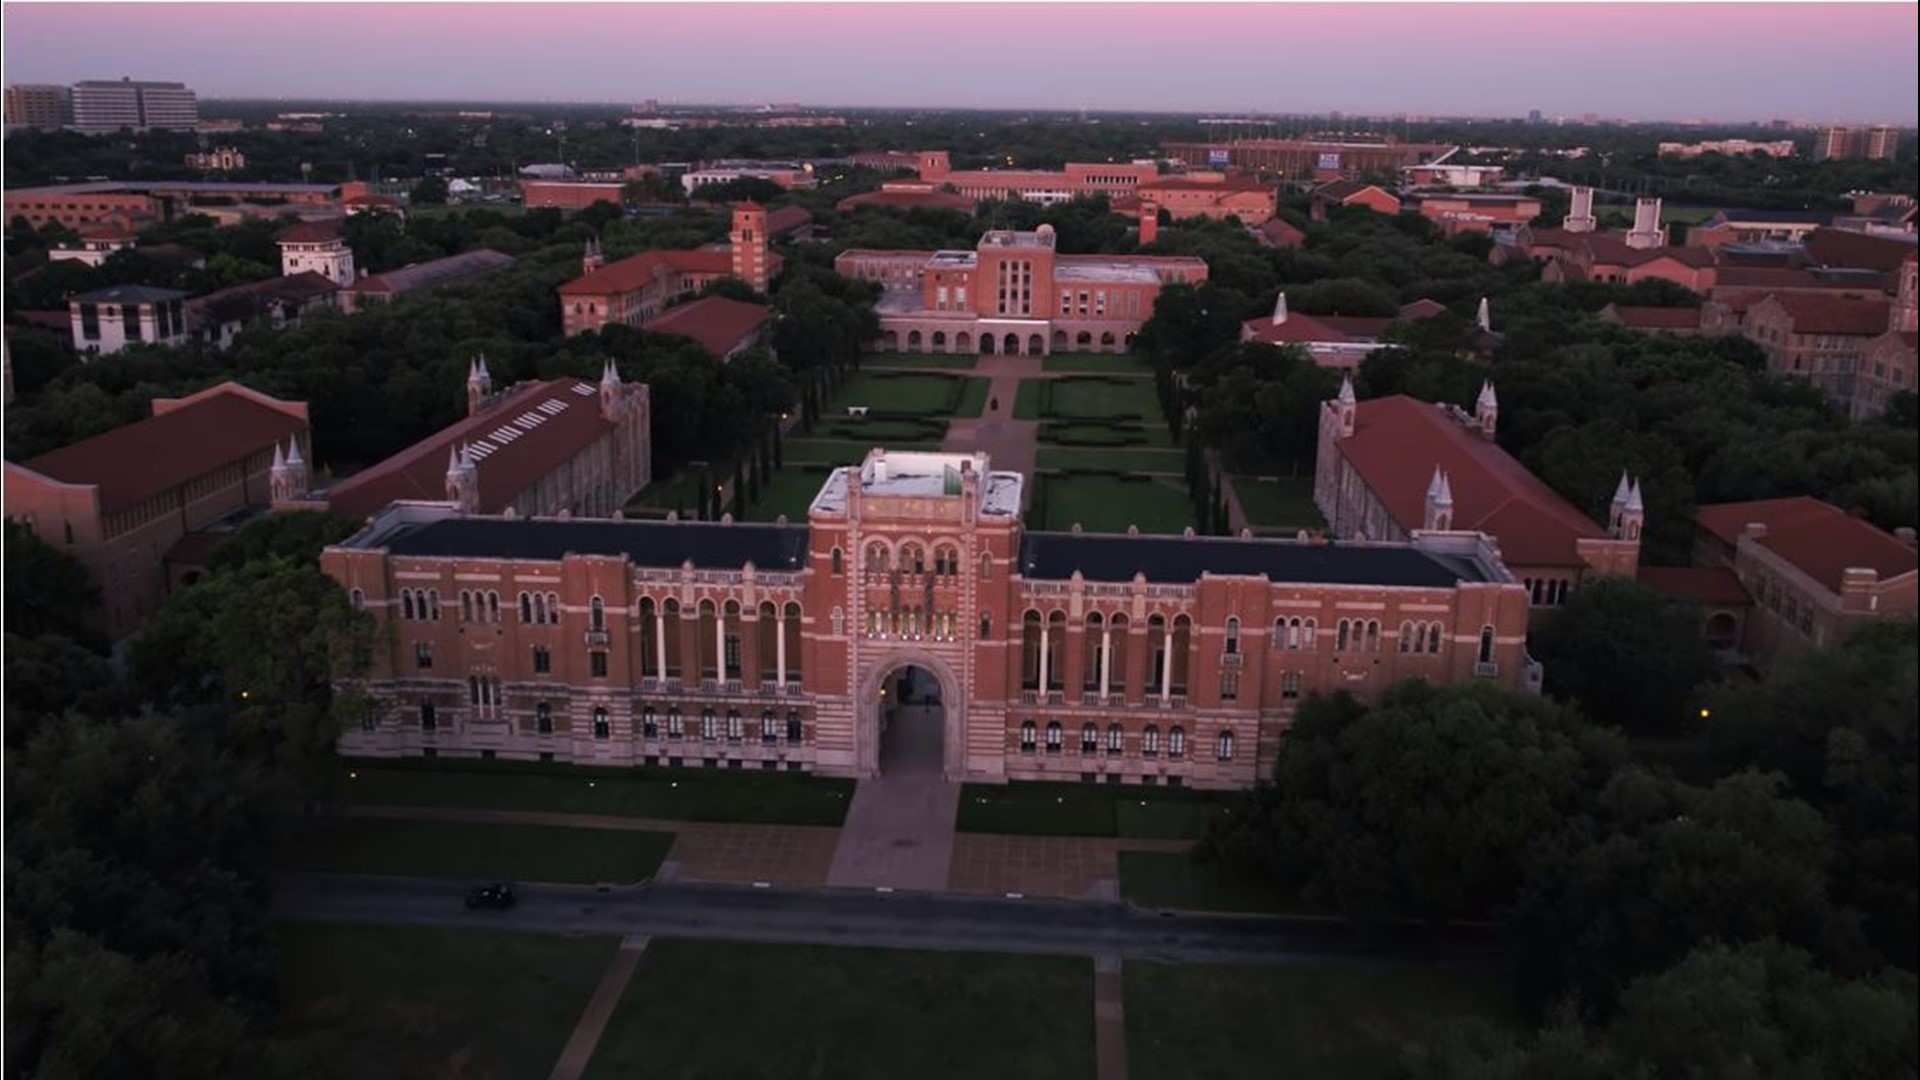 Rice ranked 4th among most beautiful US college campuses